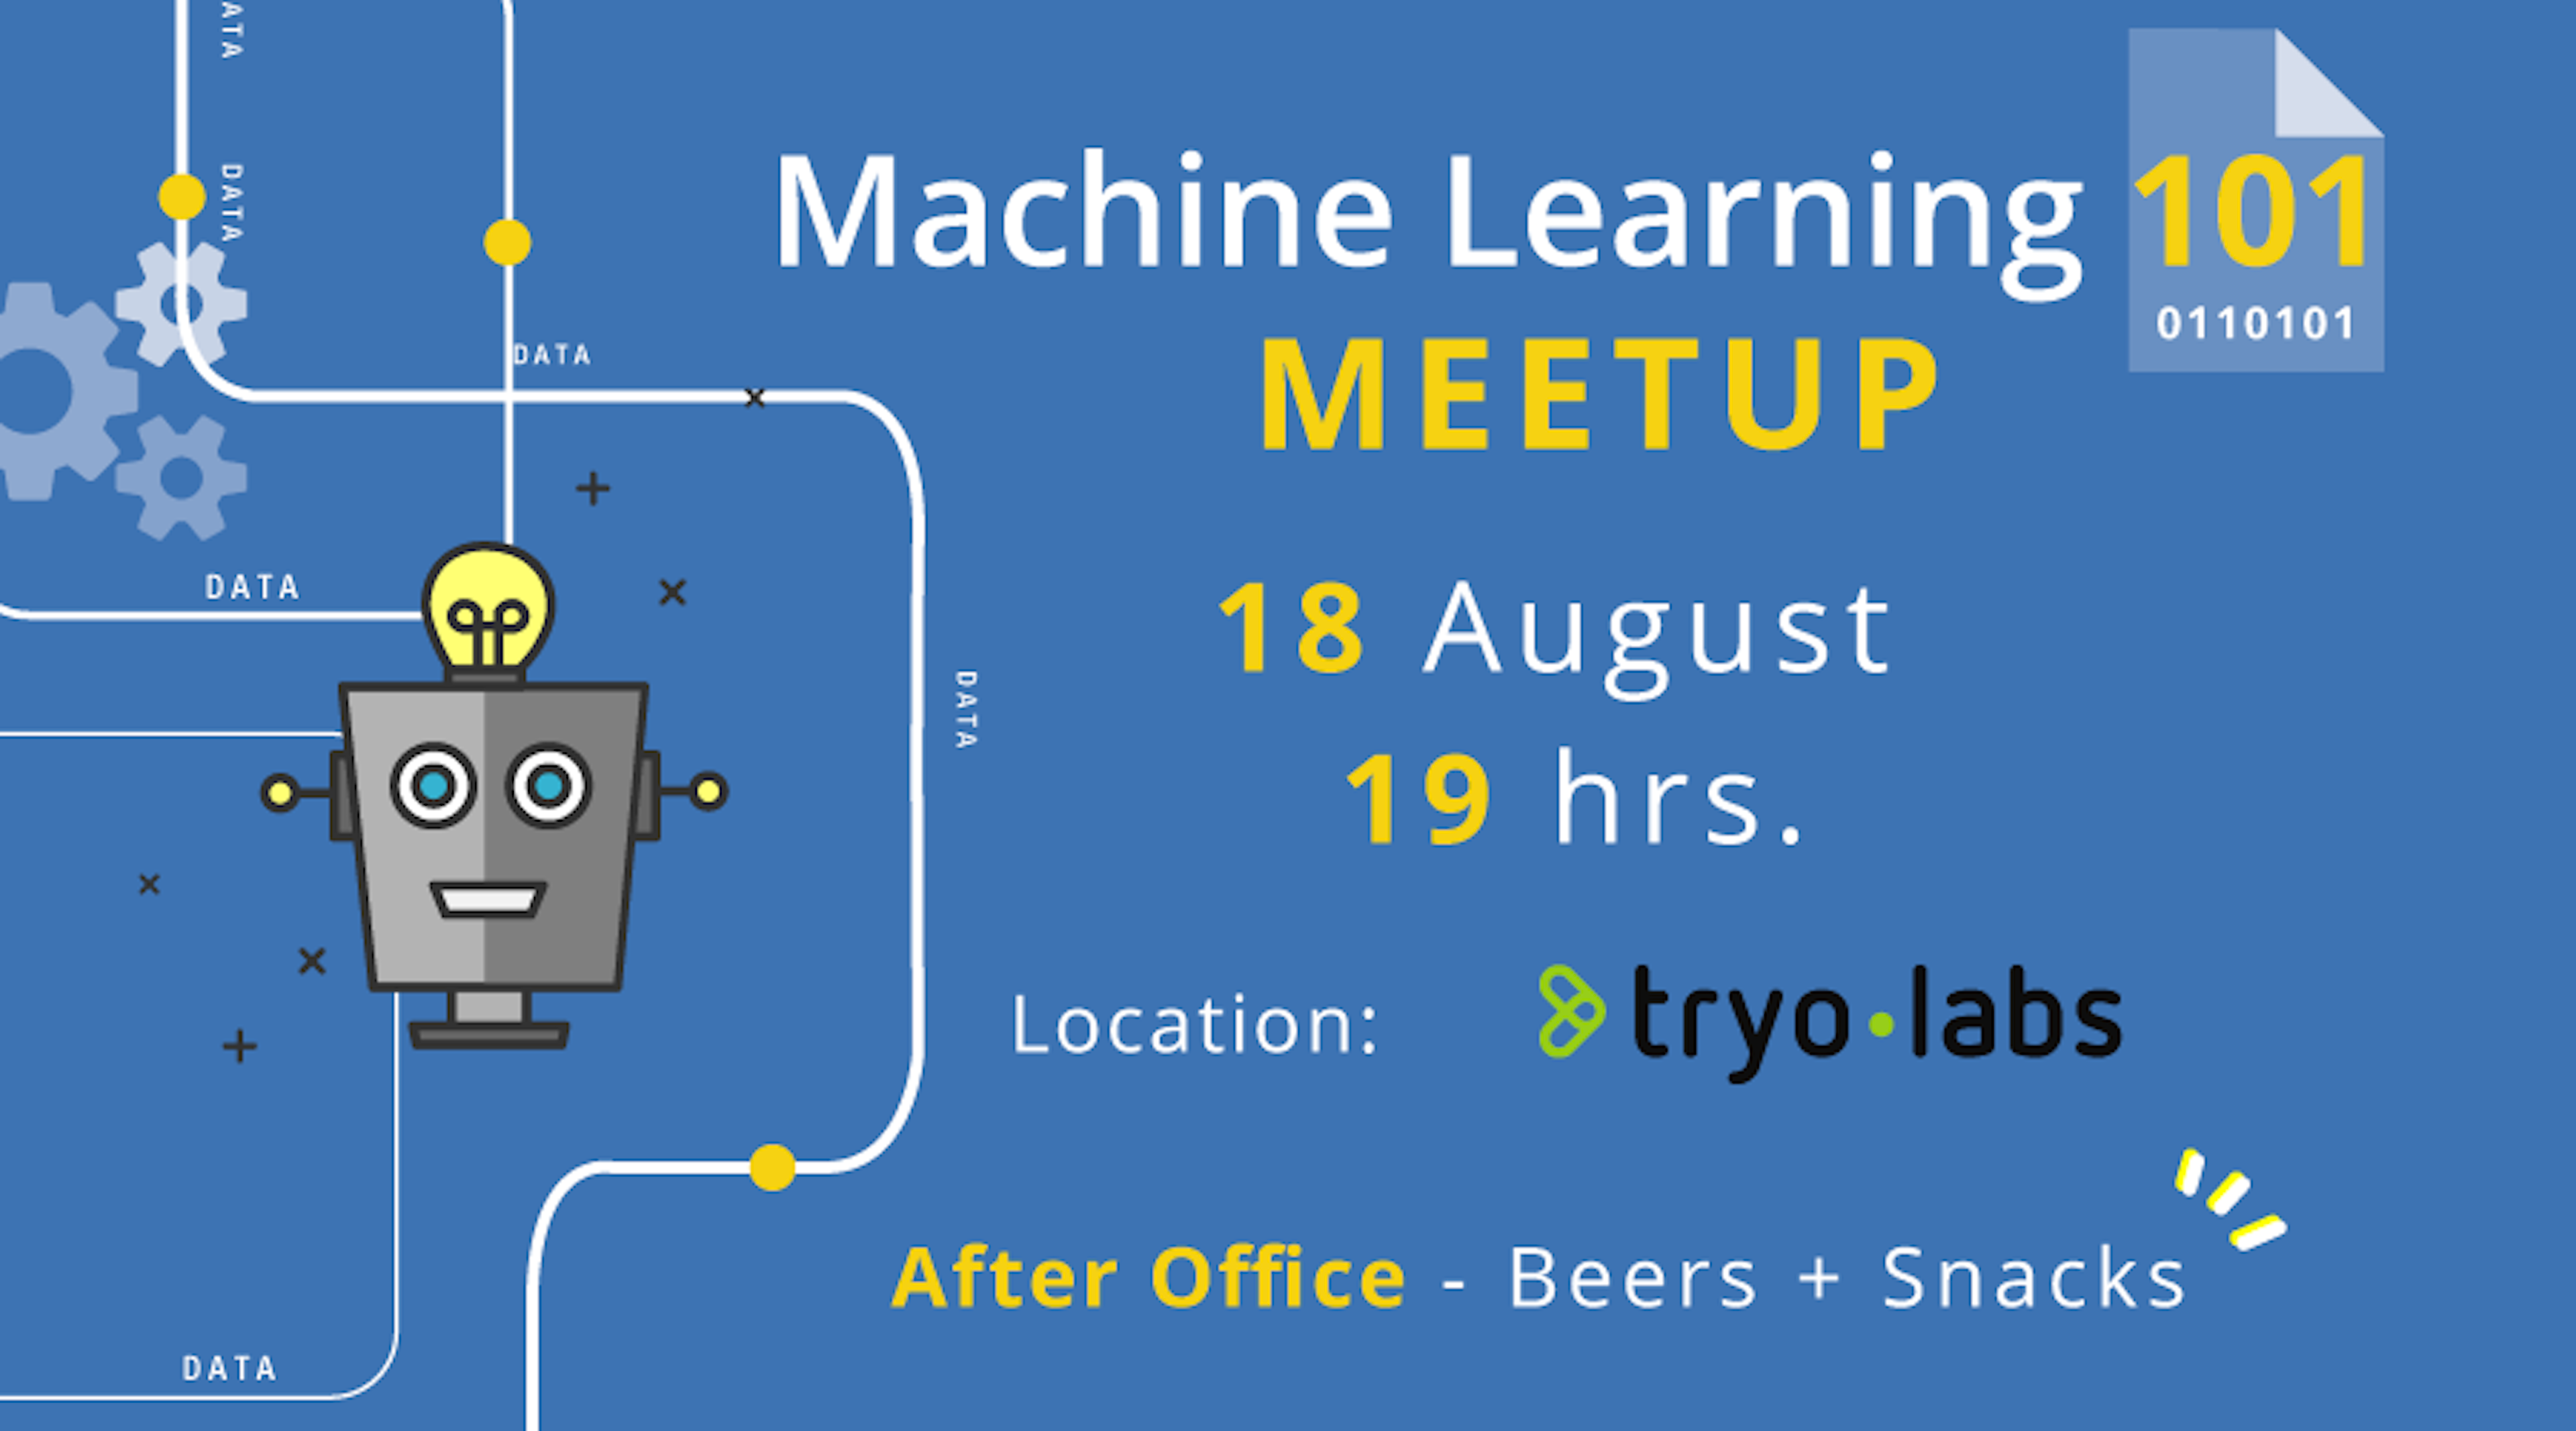 /assets/blog/2016-08-31-machine-learning-101-meetups/2016-08-31-machine-learning-101-meetups-c3fc34bbe2.png